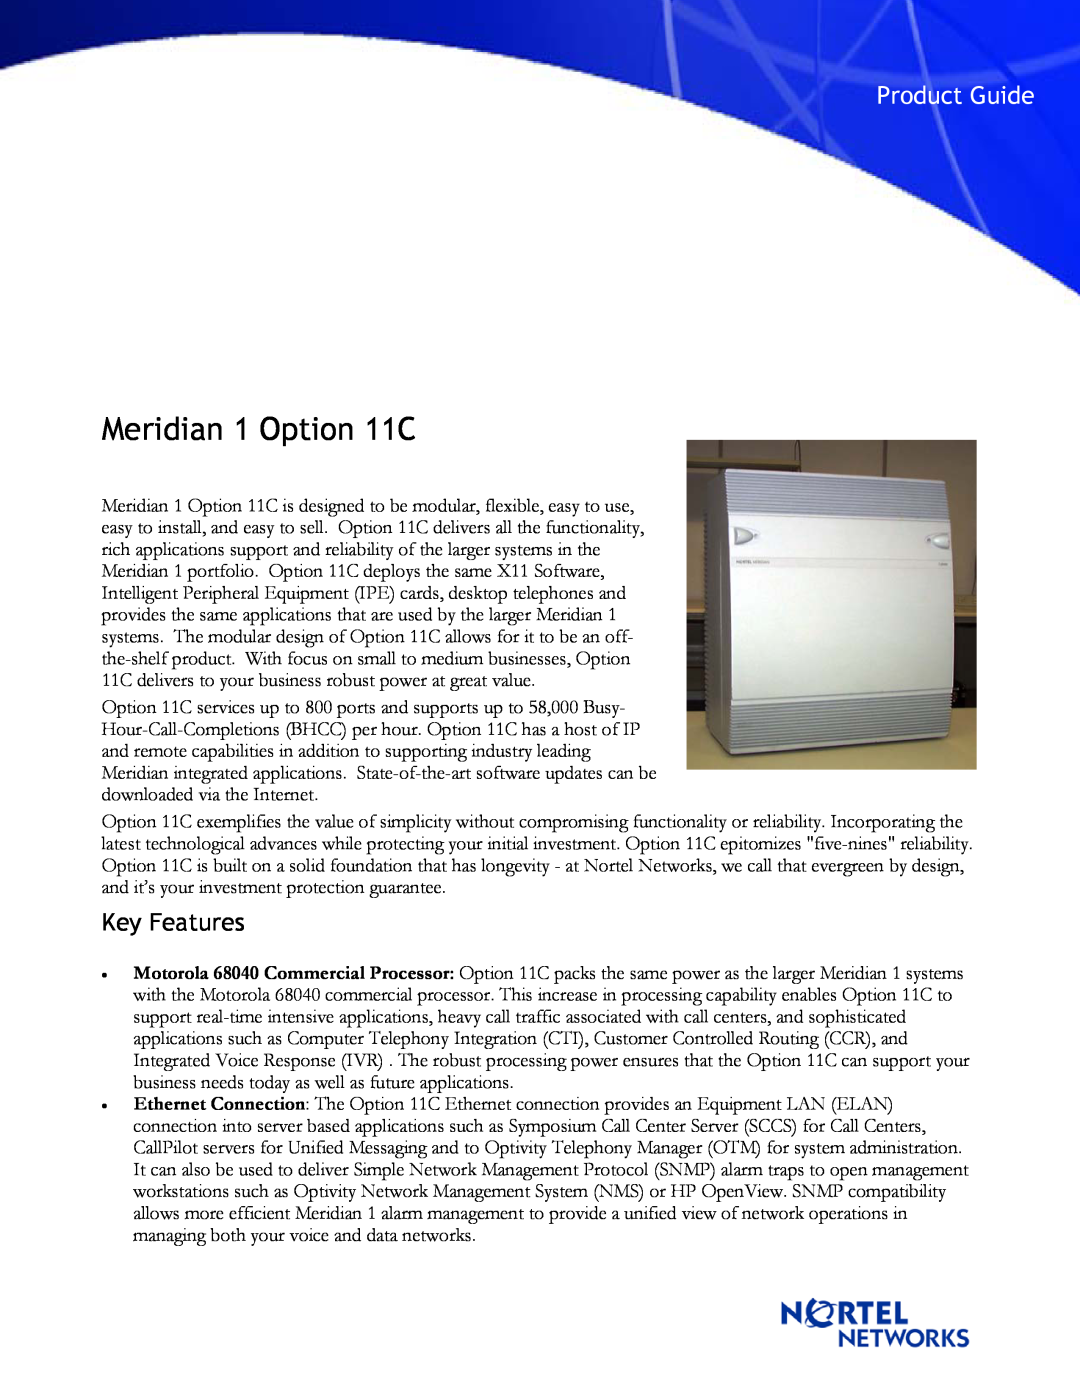 Nortel Networks 11CM manual Key Features, Meridian 1 Option 11C, Product Guide 